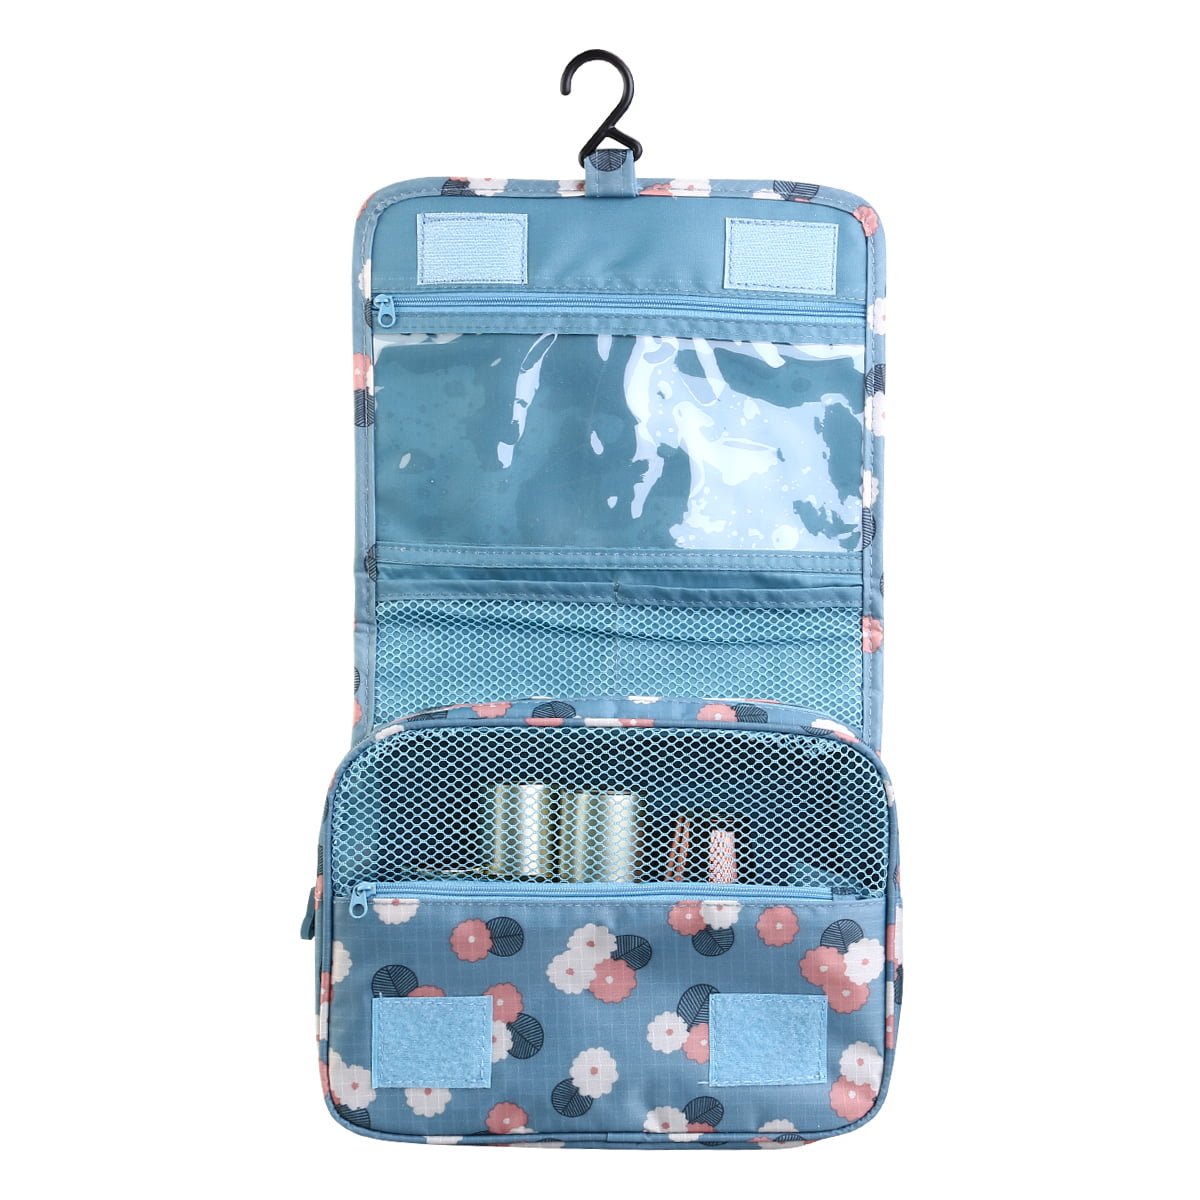 Portable Waterproof Hanging Wash Bag Toiletry Bag Travel Cosmetic Bag Pouch Organizer (Sky Blue ...